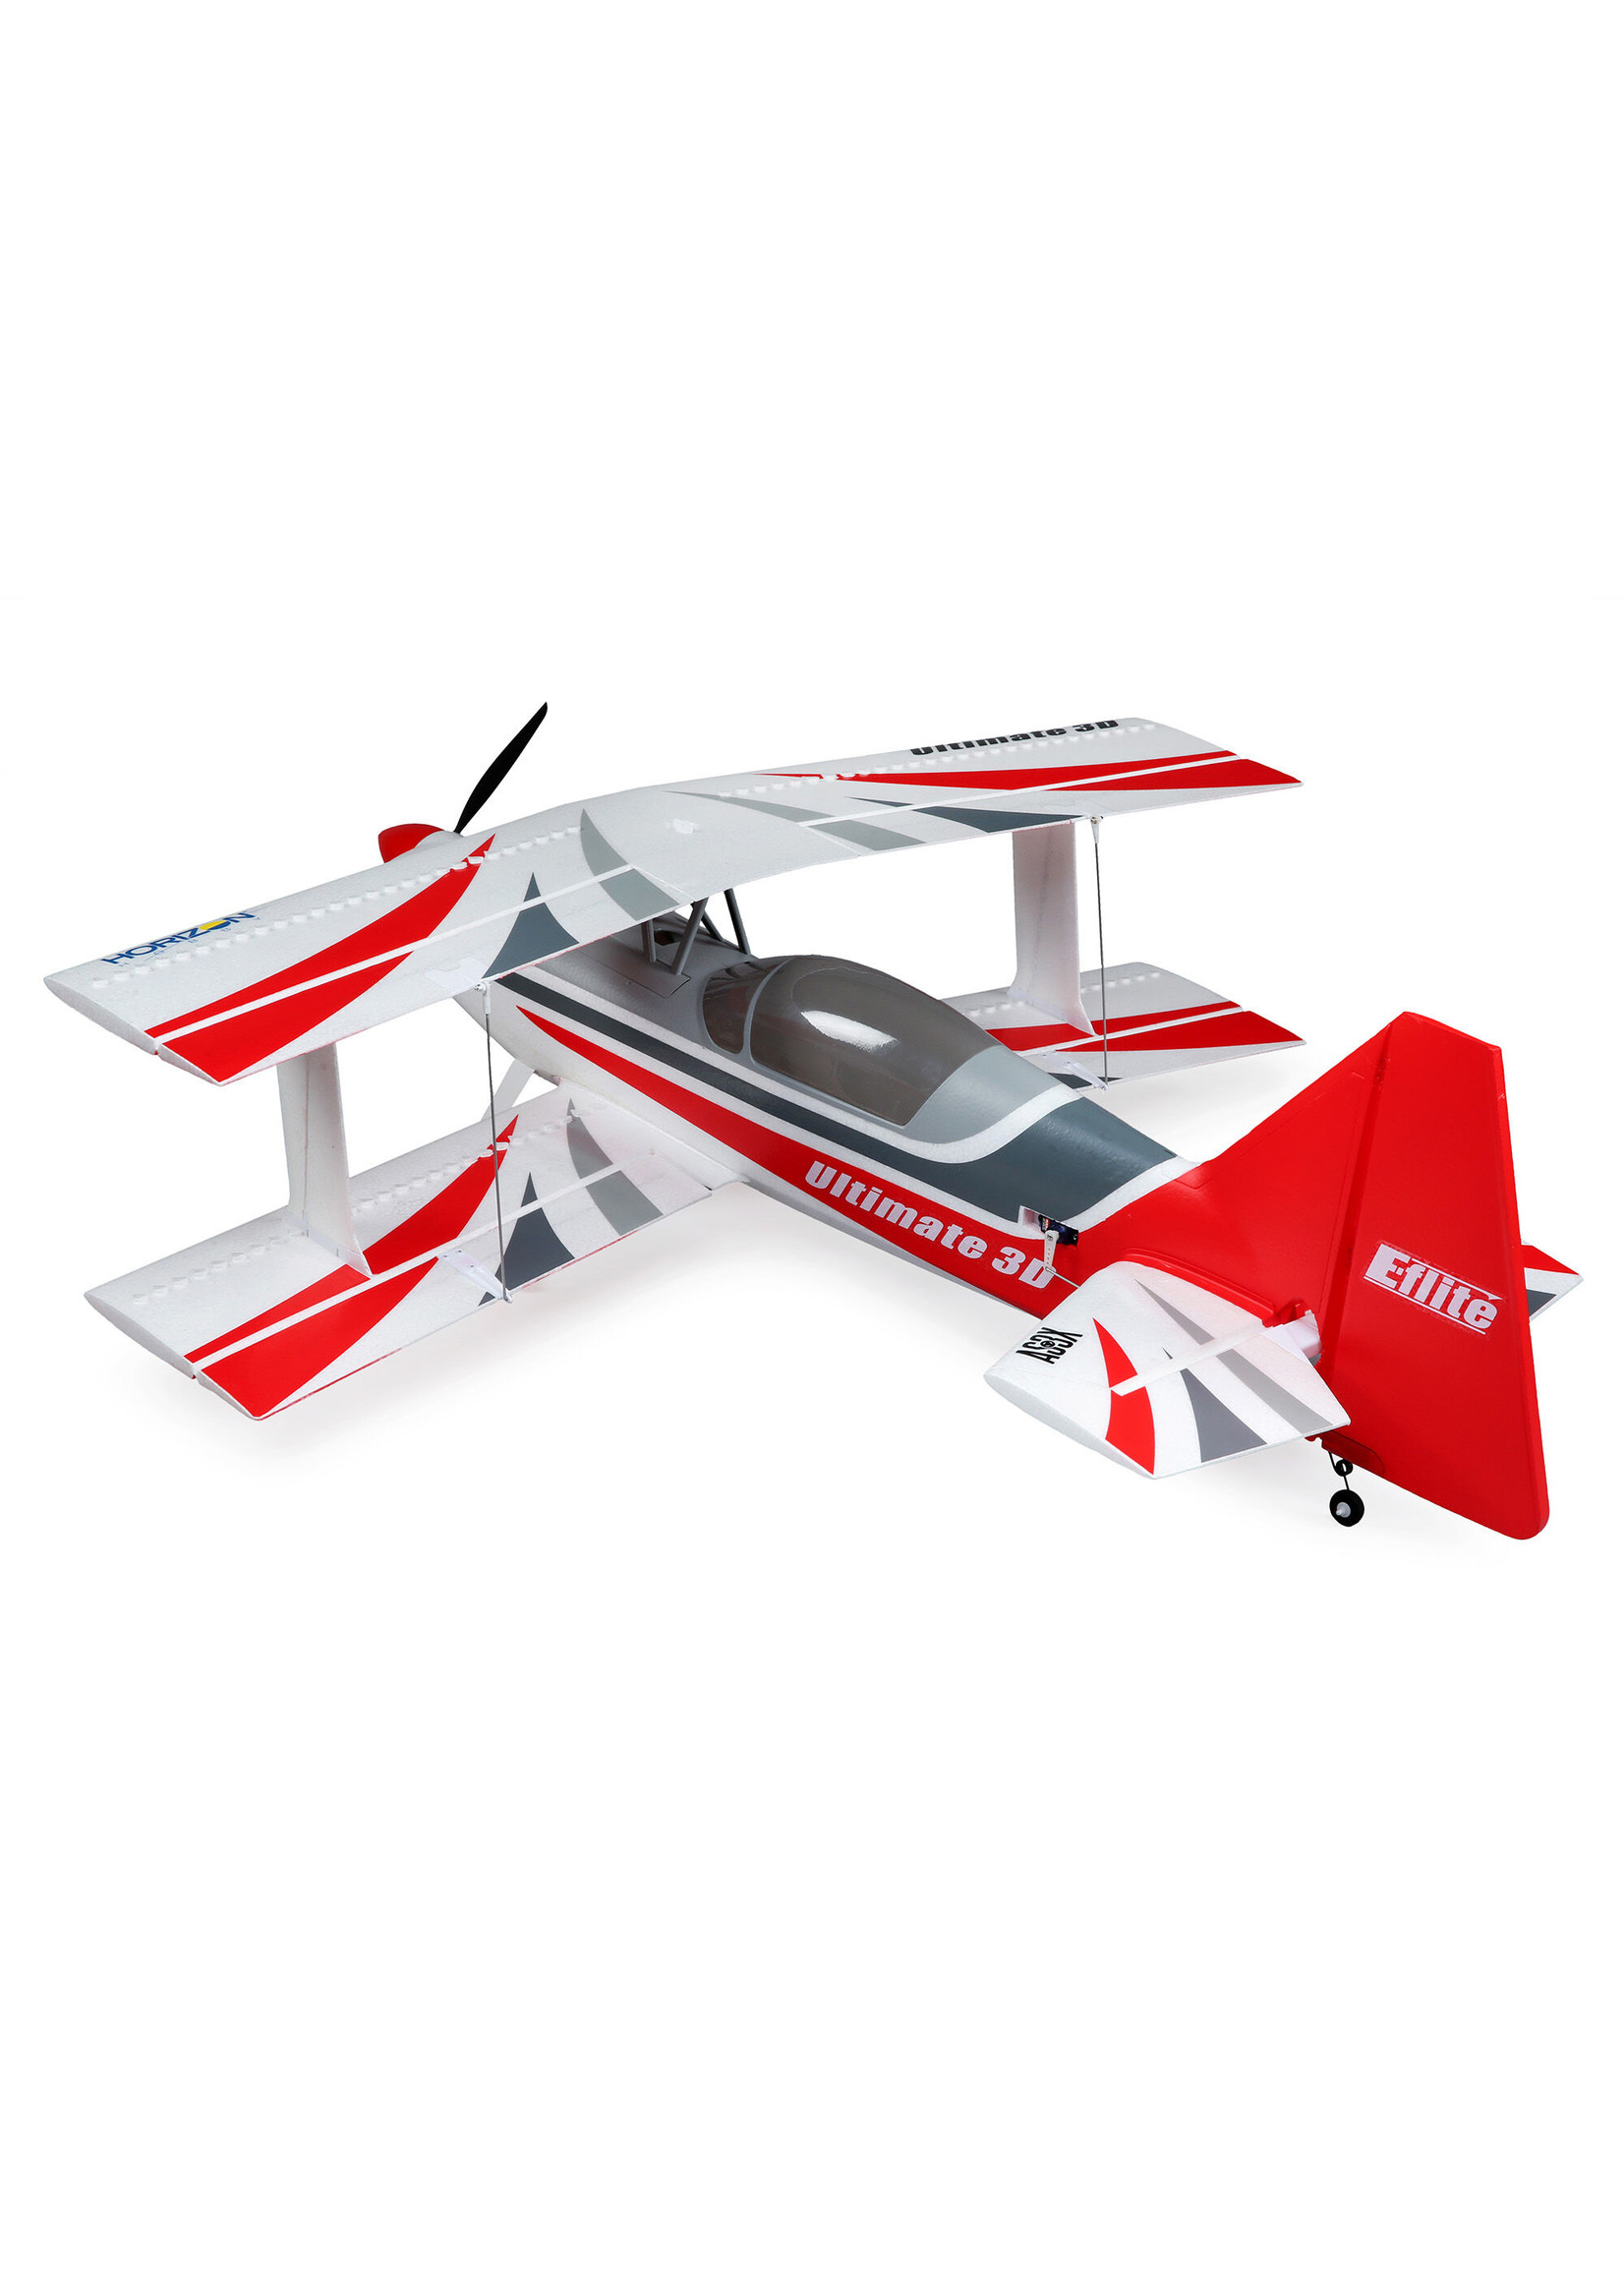 E-flite 16550 - Ultimate 3D 950mm Smart BNF Basic with AS3X & SAFE